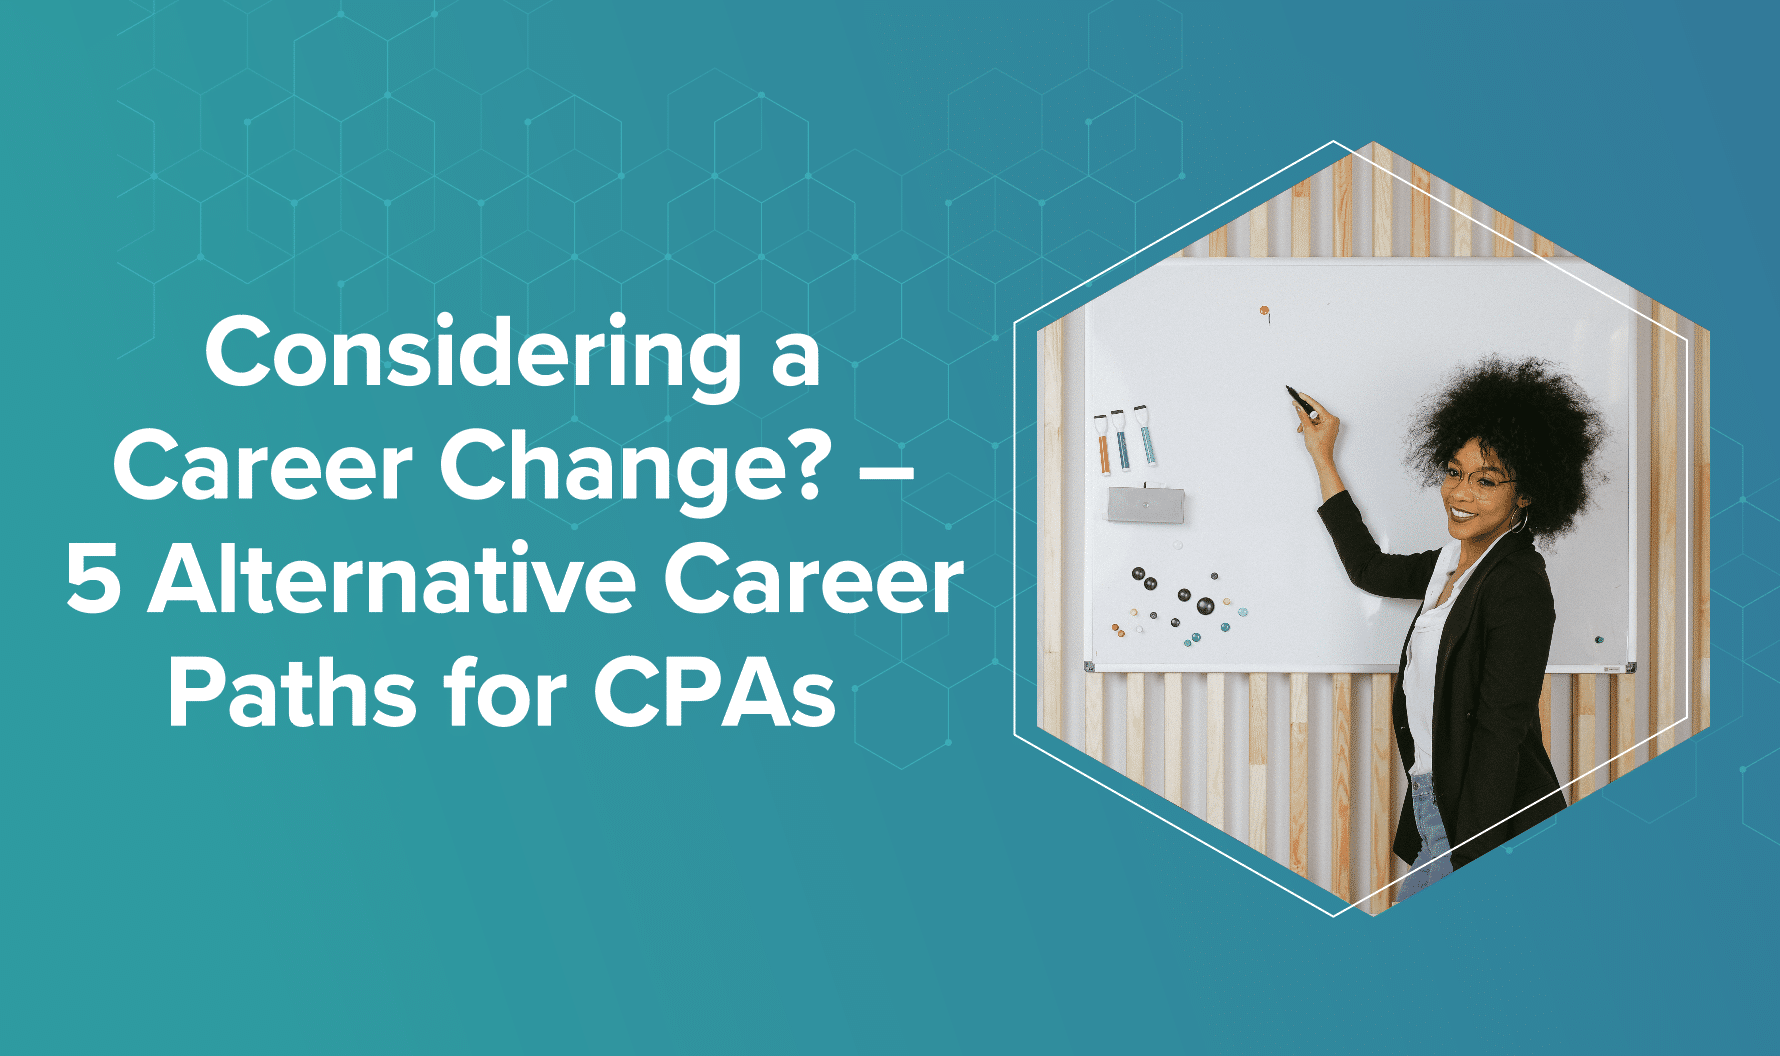 Considering a Career Change? – 5 Alternative Career Paths for CPAs